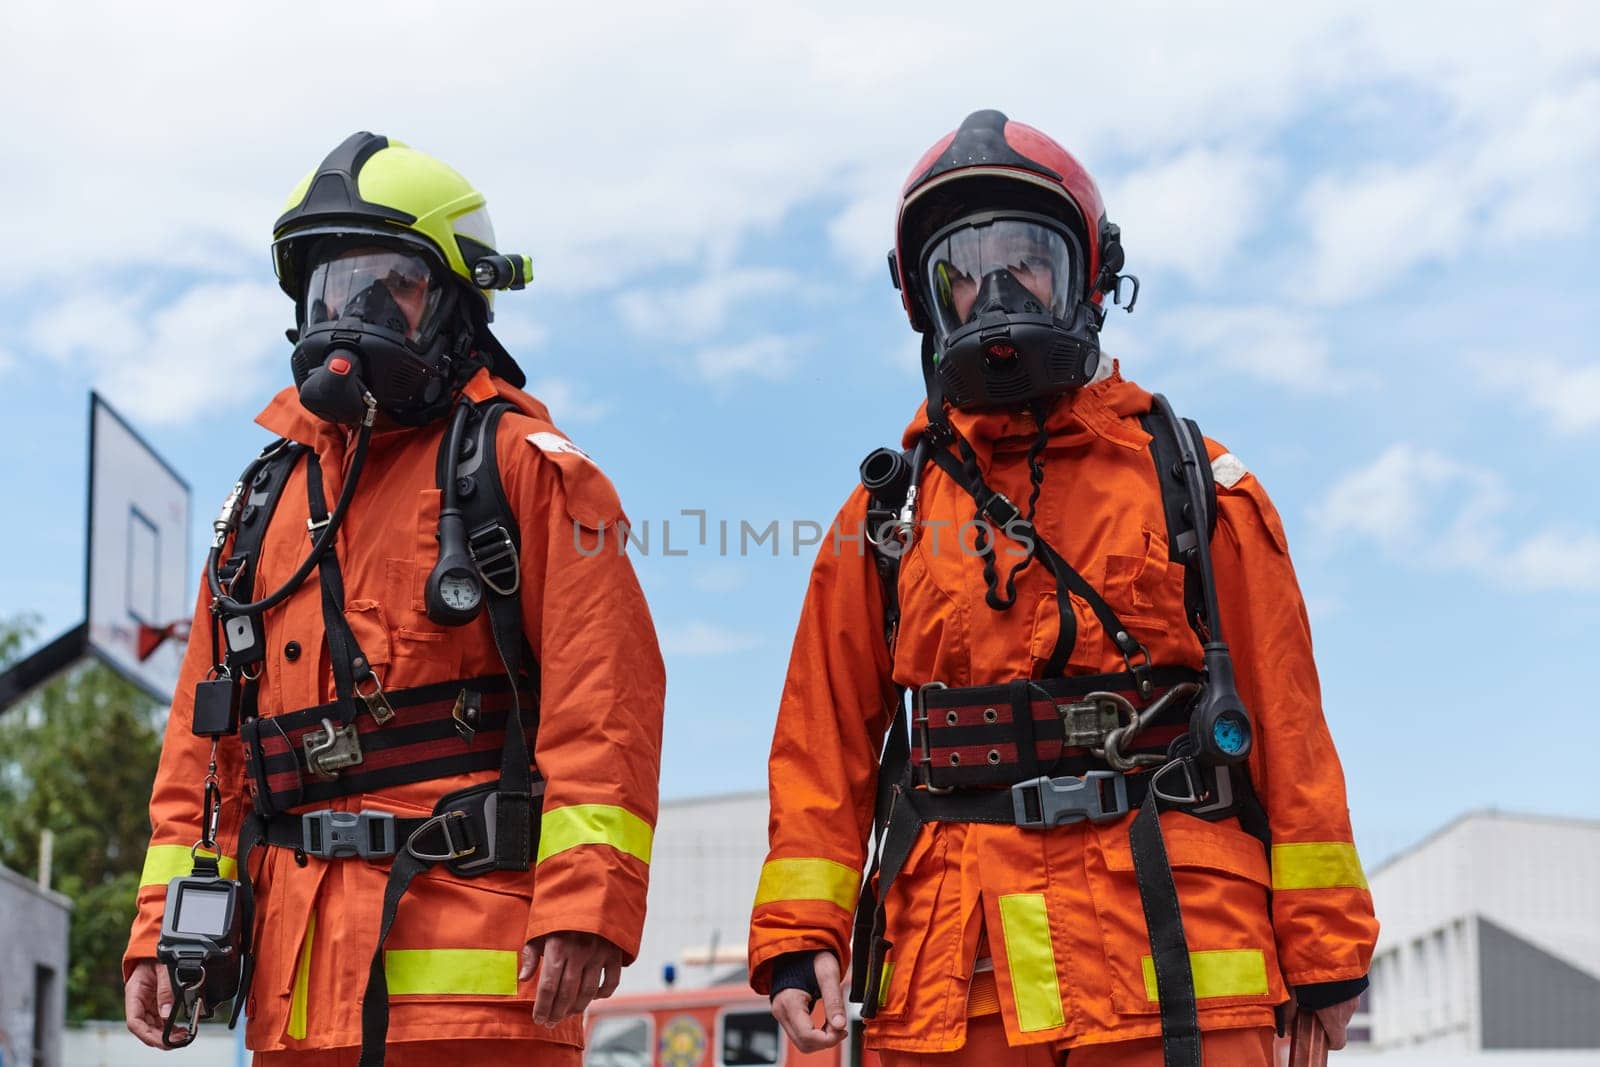 A team of firefighters, dressed in professional gear, undergoes training to learn how to use various firefighting tools and prepare for firefighting tasks.